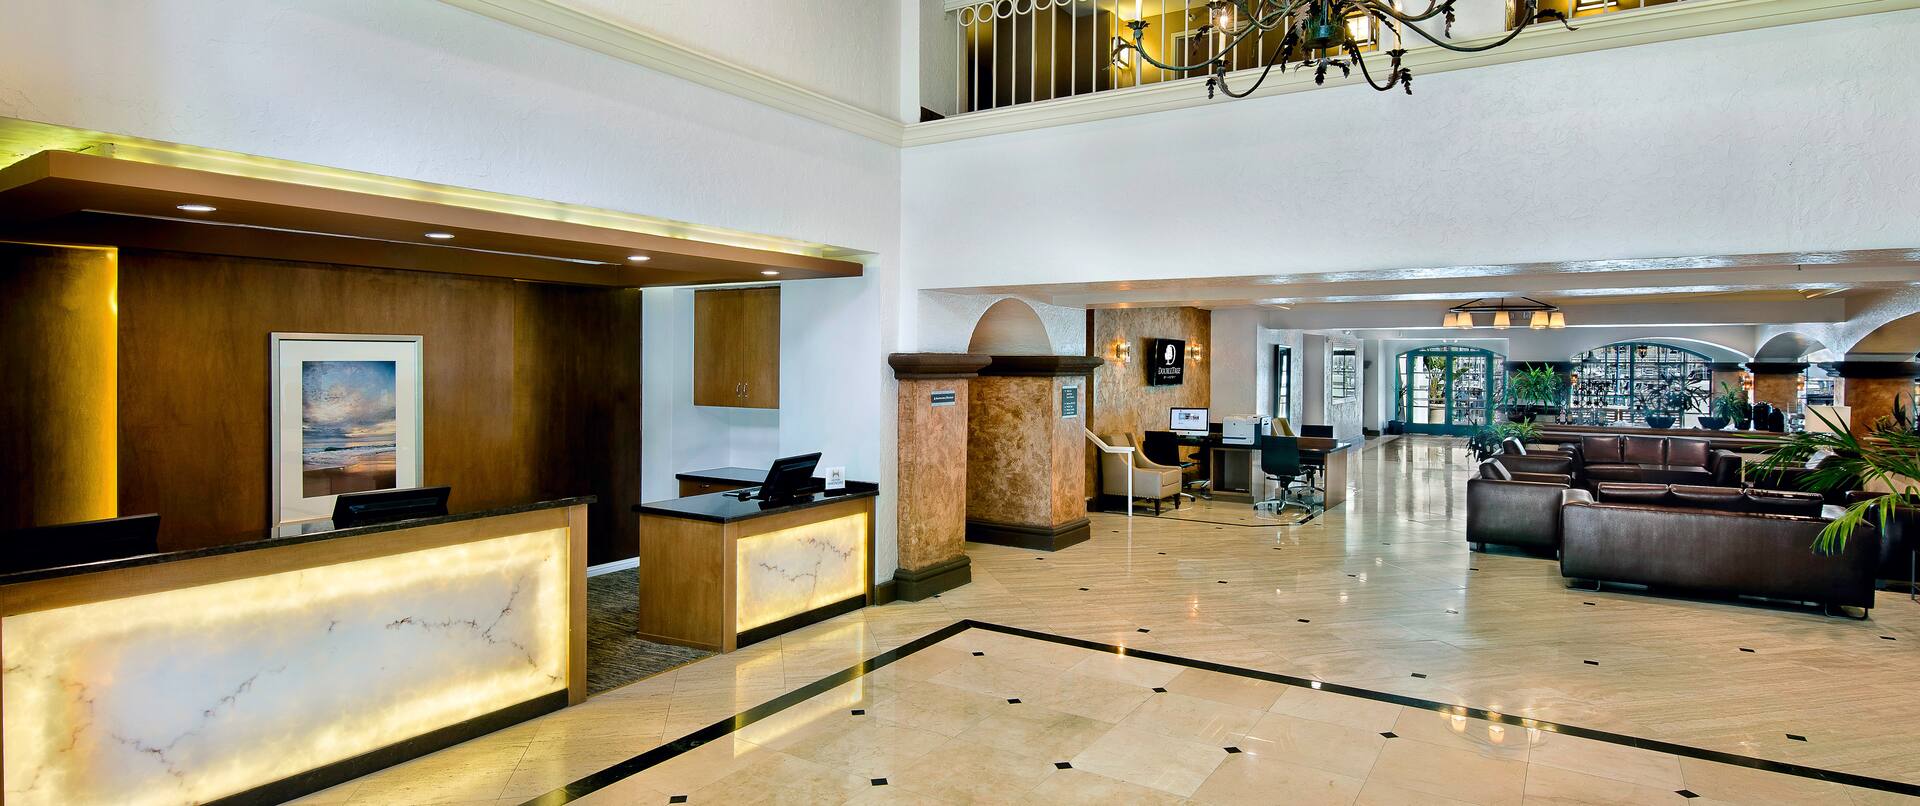 Lobby Area with front desk